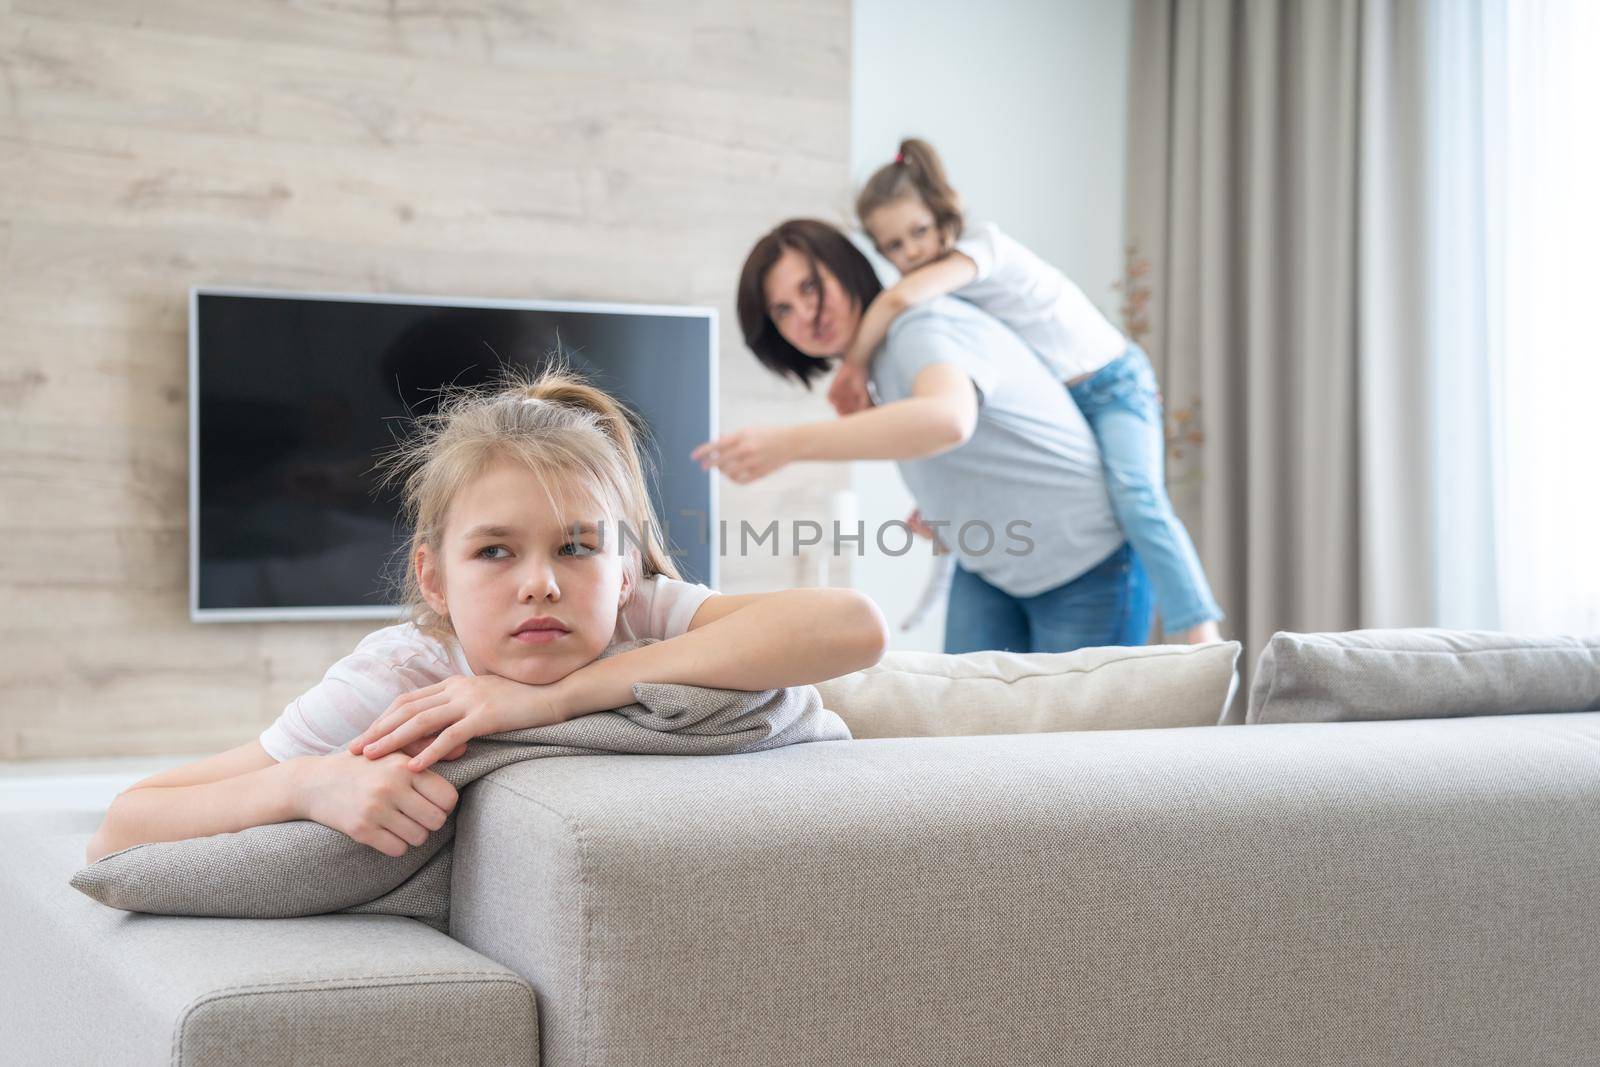 Preteenage sad girl sitting on a couch while mother having fun with sister, jealousy concept by Mariakray